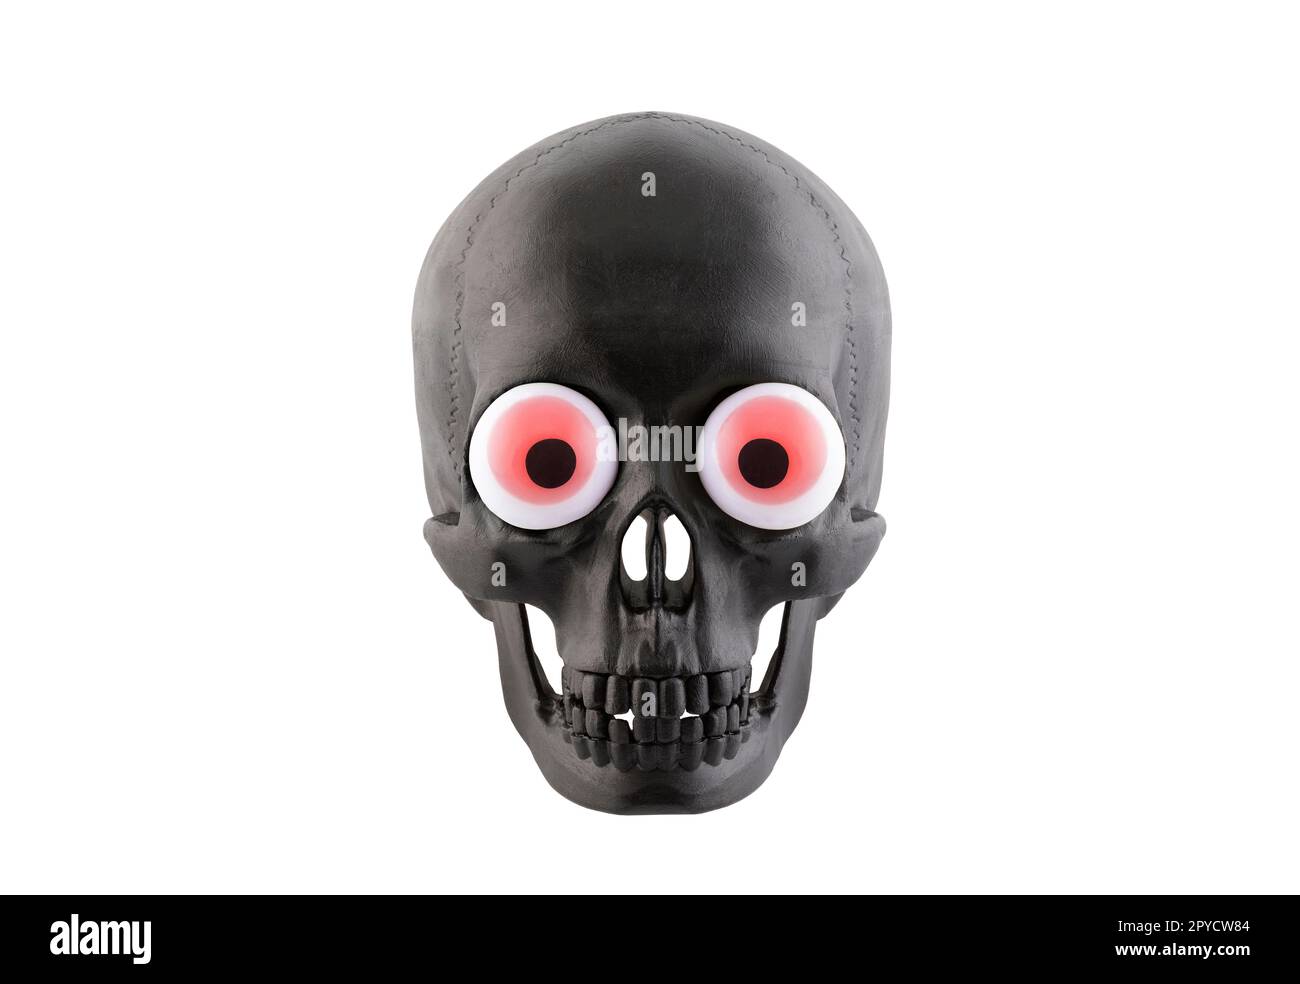 Black human skull with red eyes isolated on white background with clipping path Stock Photo